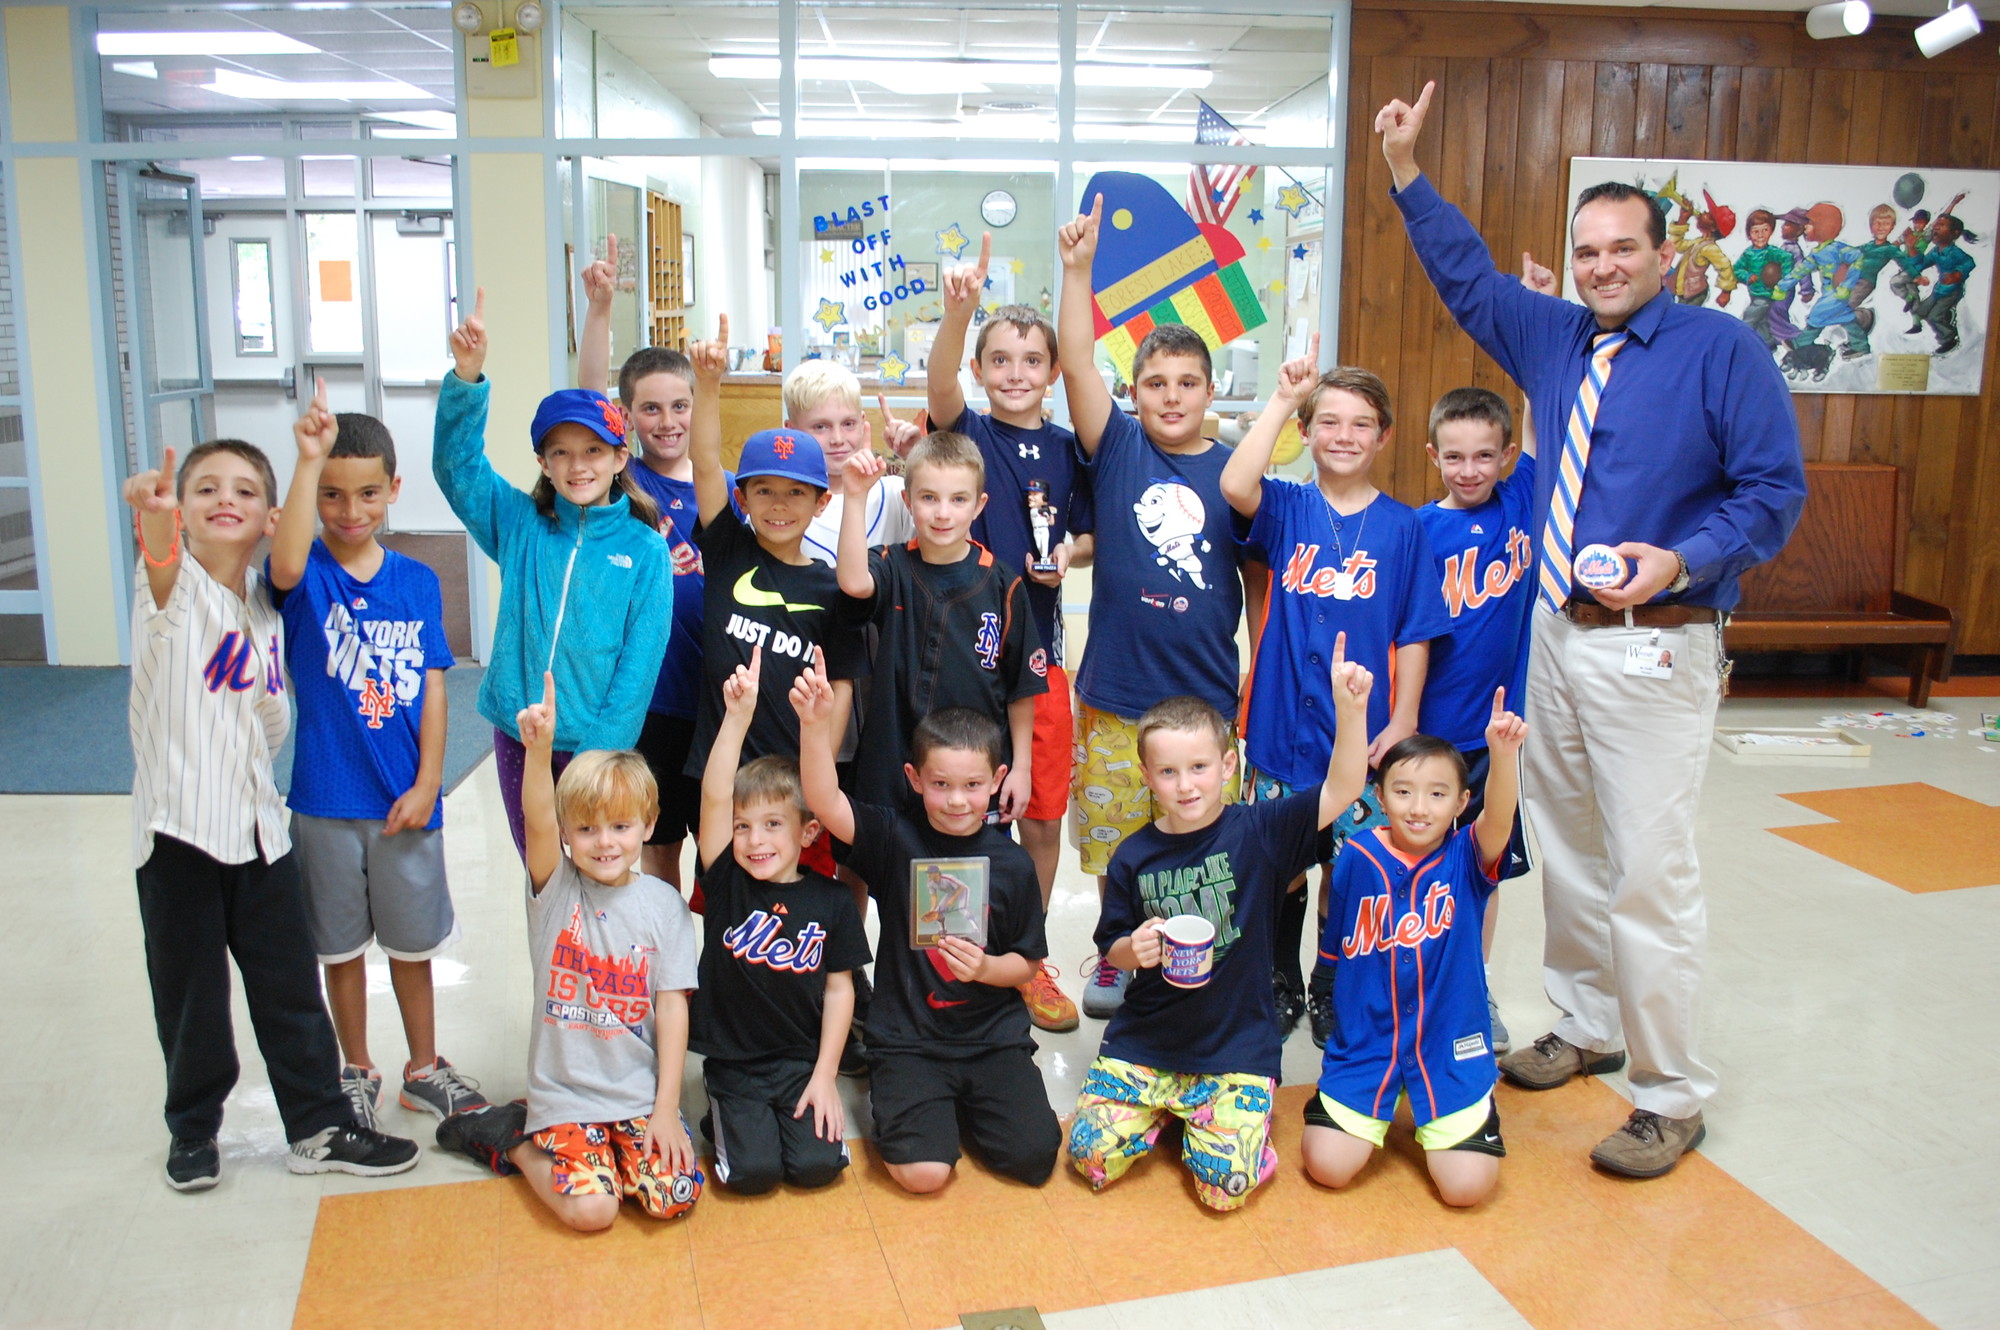 At Forest Lake Elementary School on Oct. 22, Principal Anthony Ciuffo and several of his students celebrated the Mets’ advancement to the World Series.